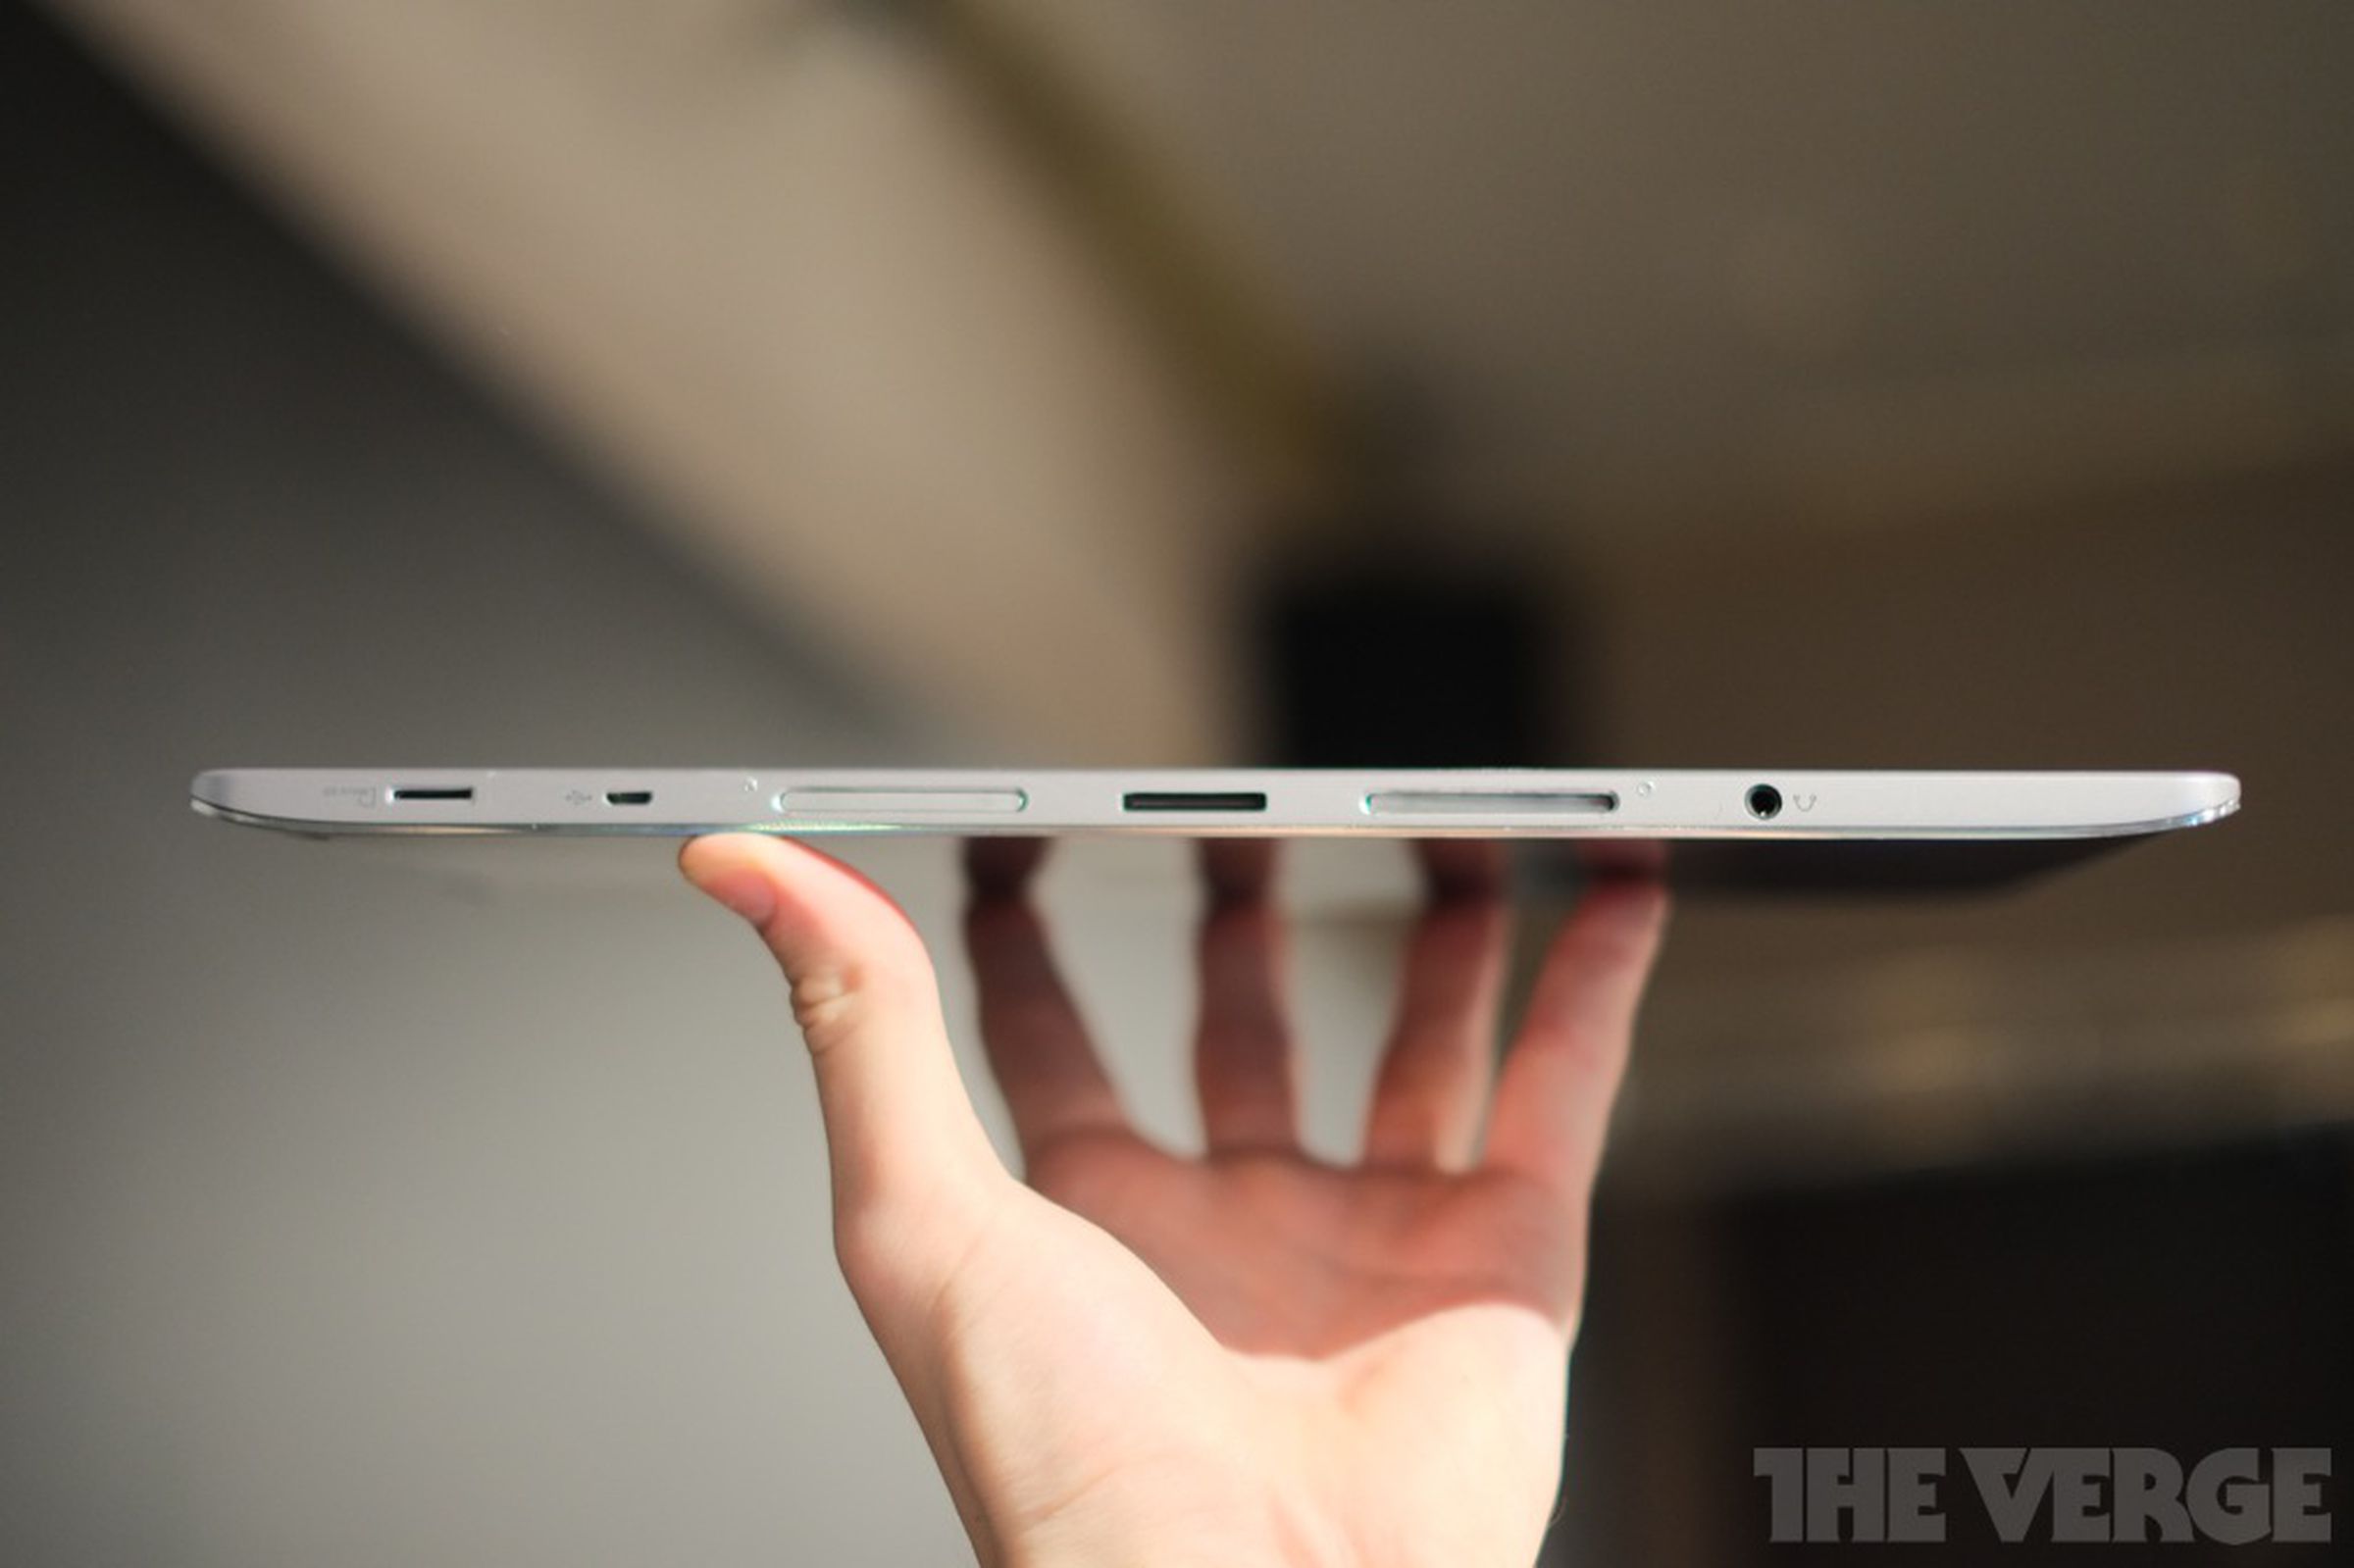 Asus Transformer Book Trio hands-on and press pictures